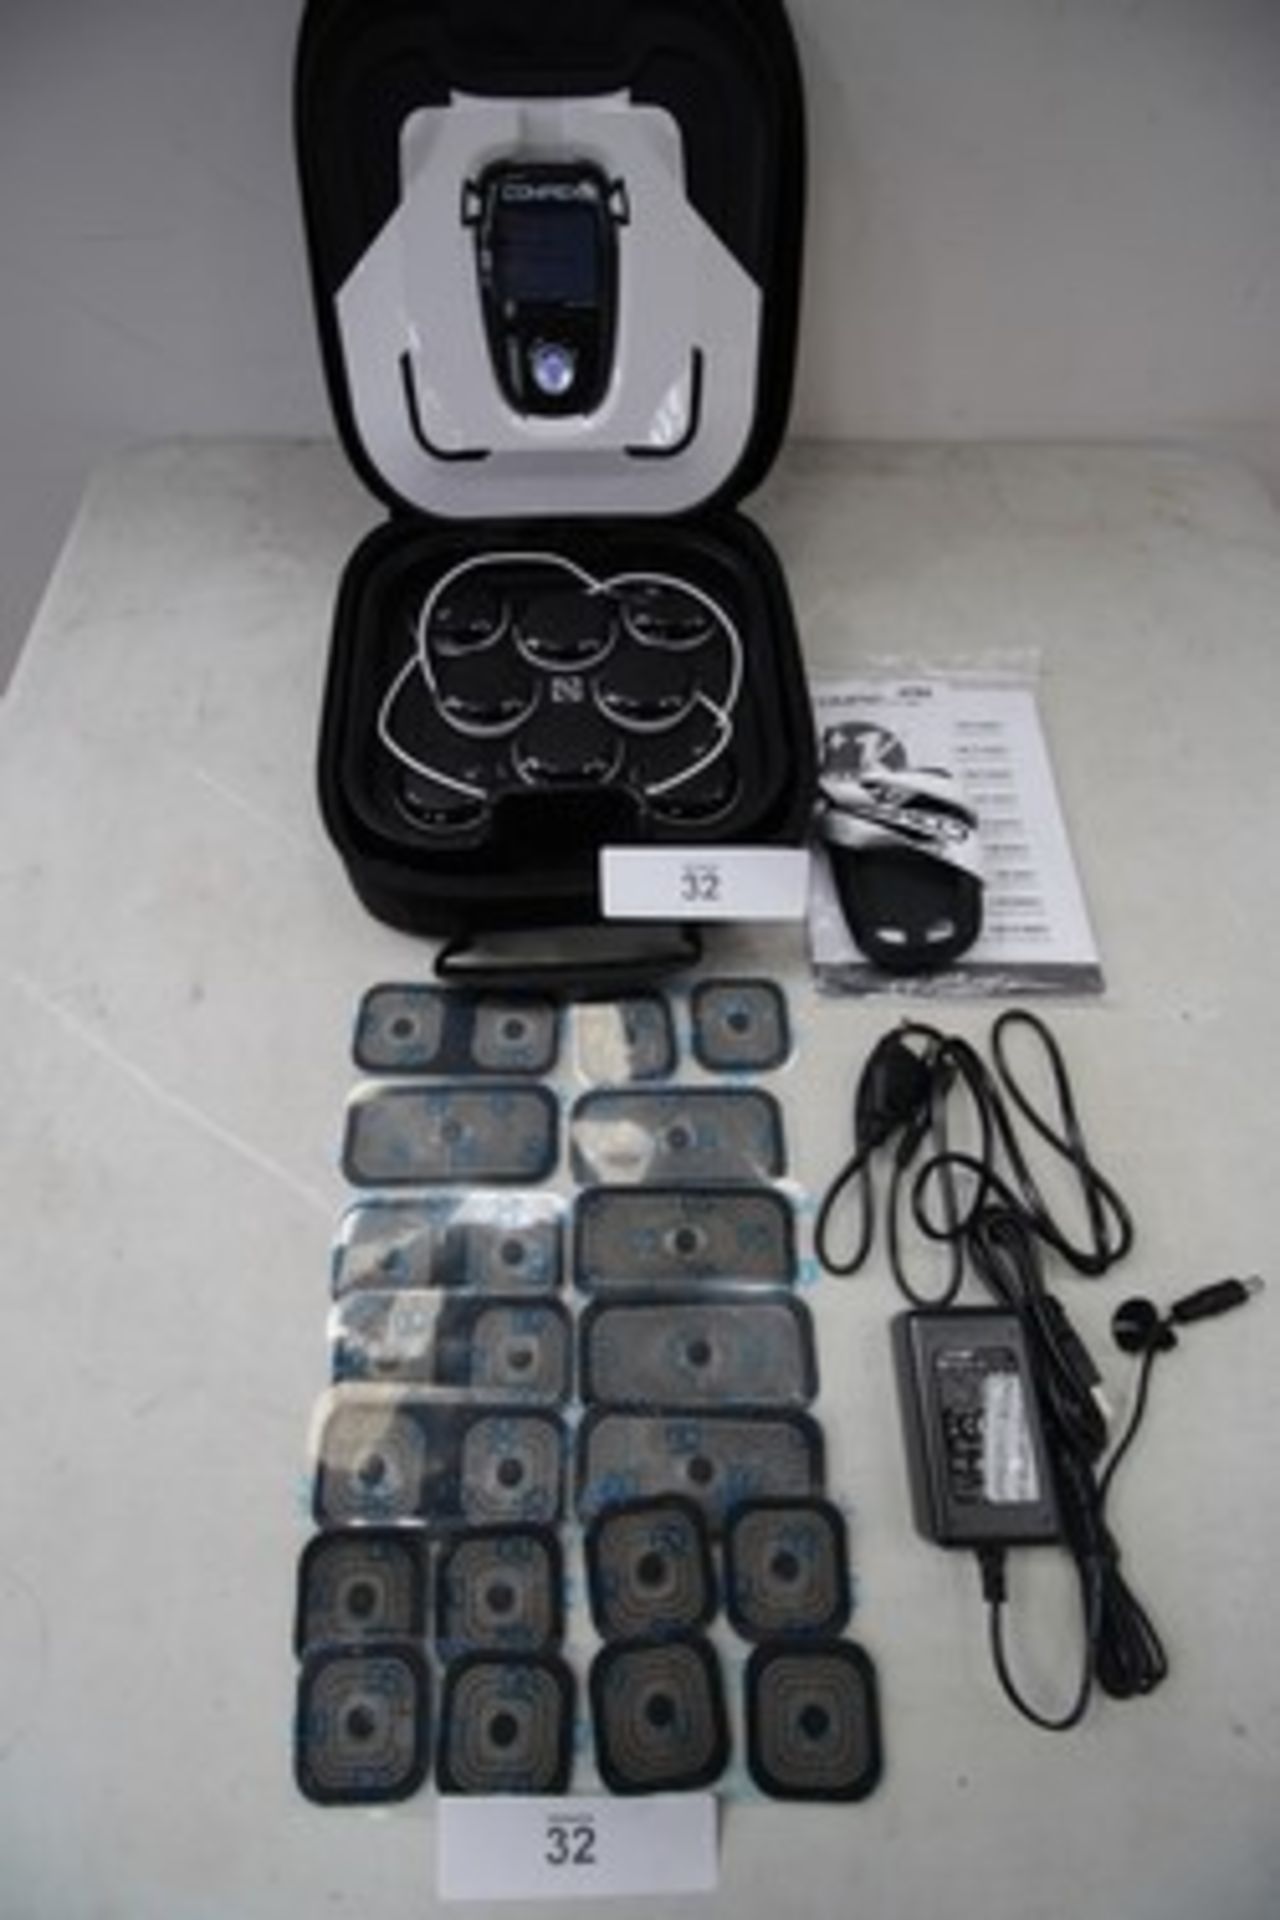 1 x Compex SP 8.0 wireless muscle stimulator, powers on ok, not tested, in carry case - spares (